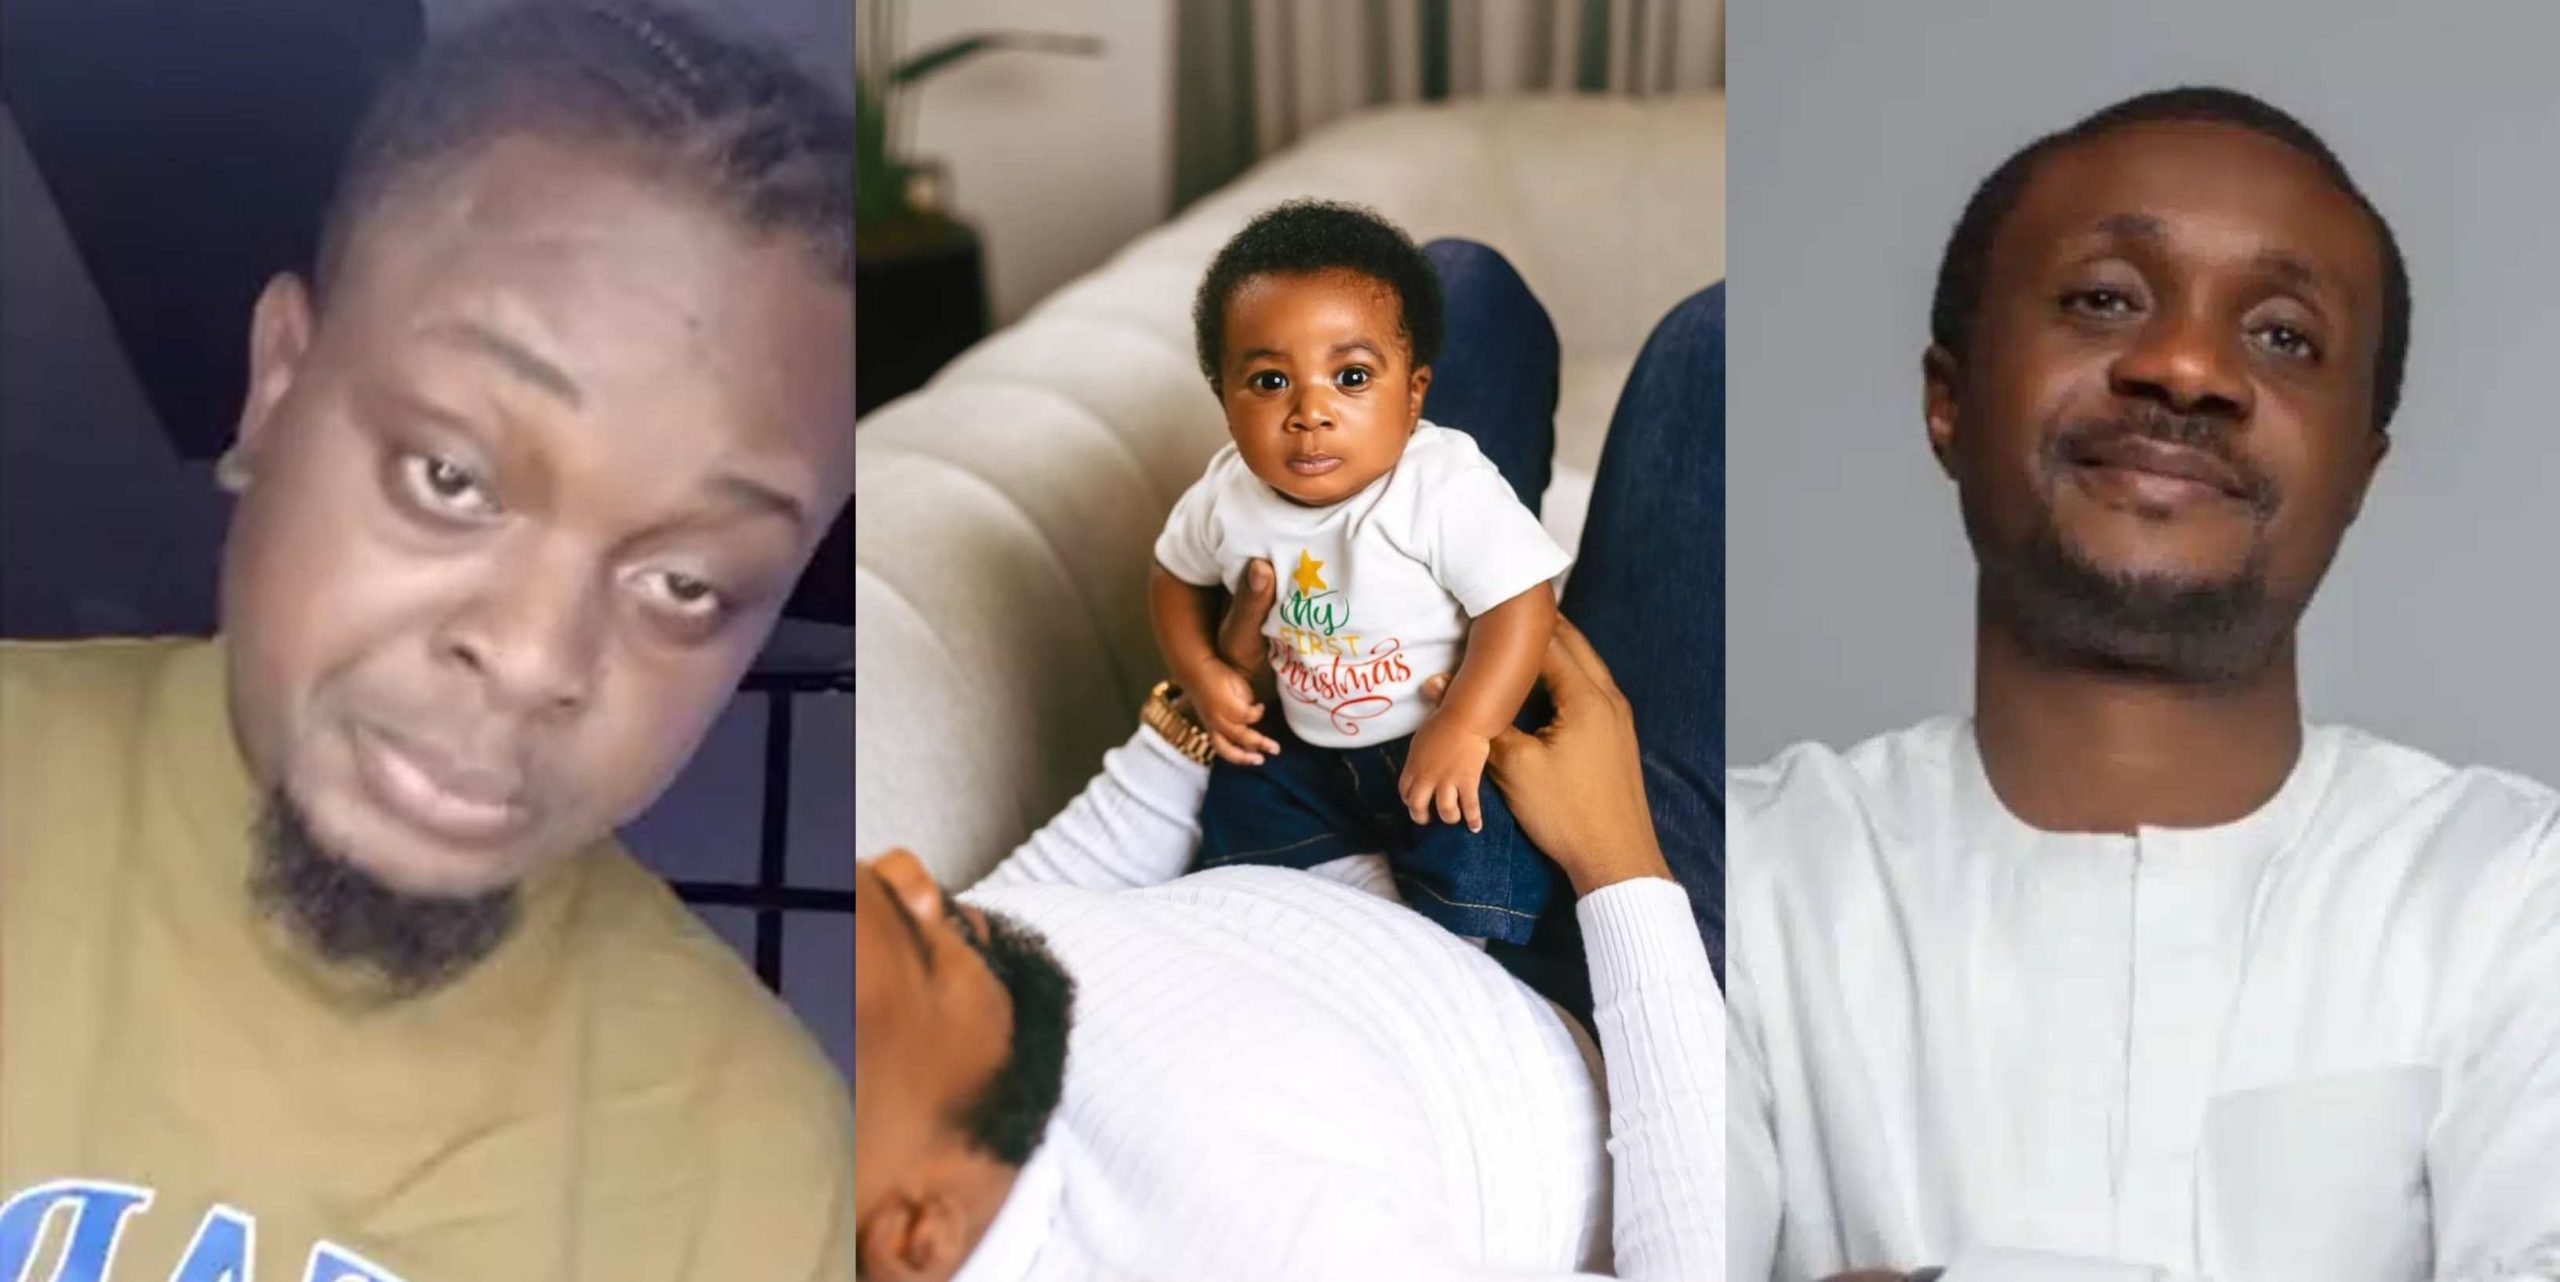 “The child resemble him, there's nothing you can tell me, that’s an opinion not a crime” - Nigerian Man sued by Nathaniel Bassey insists 